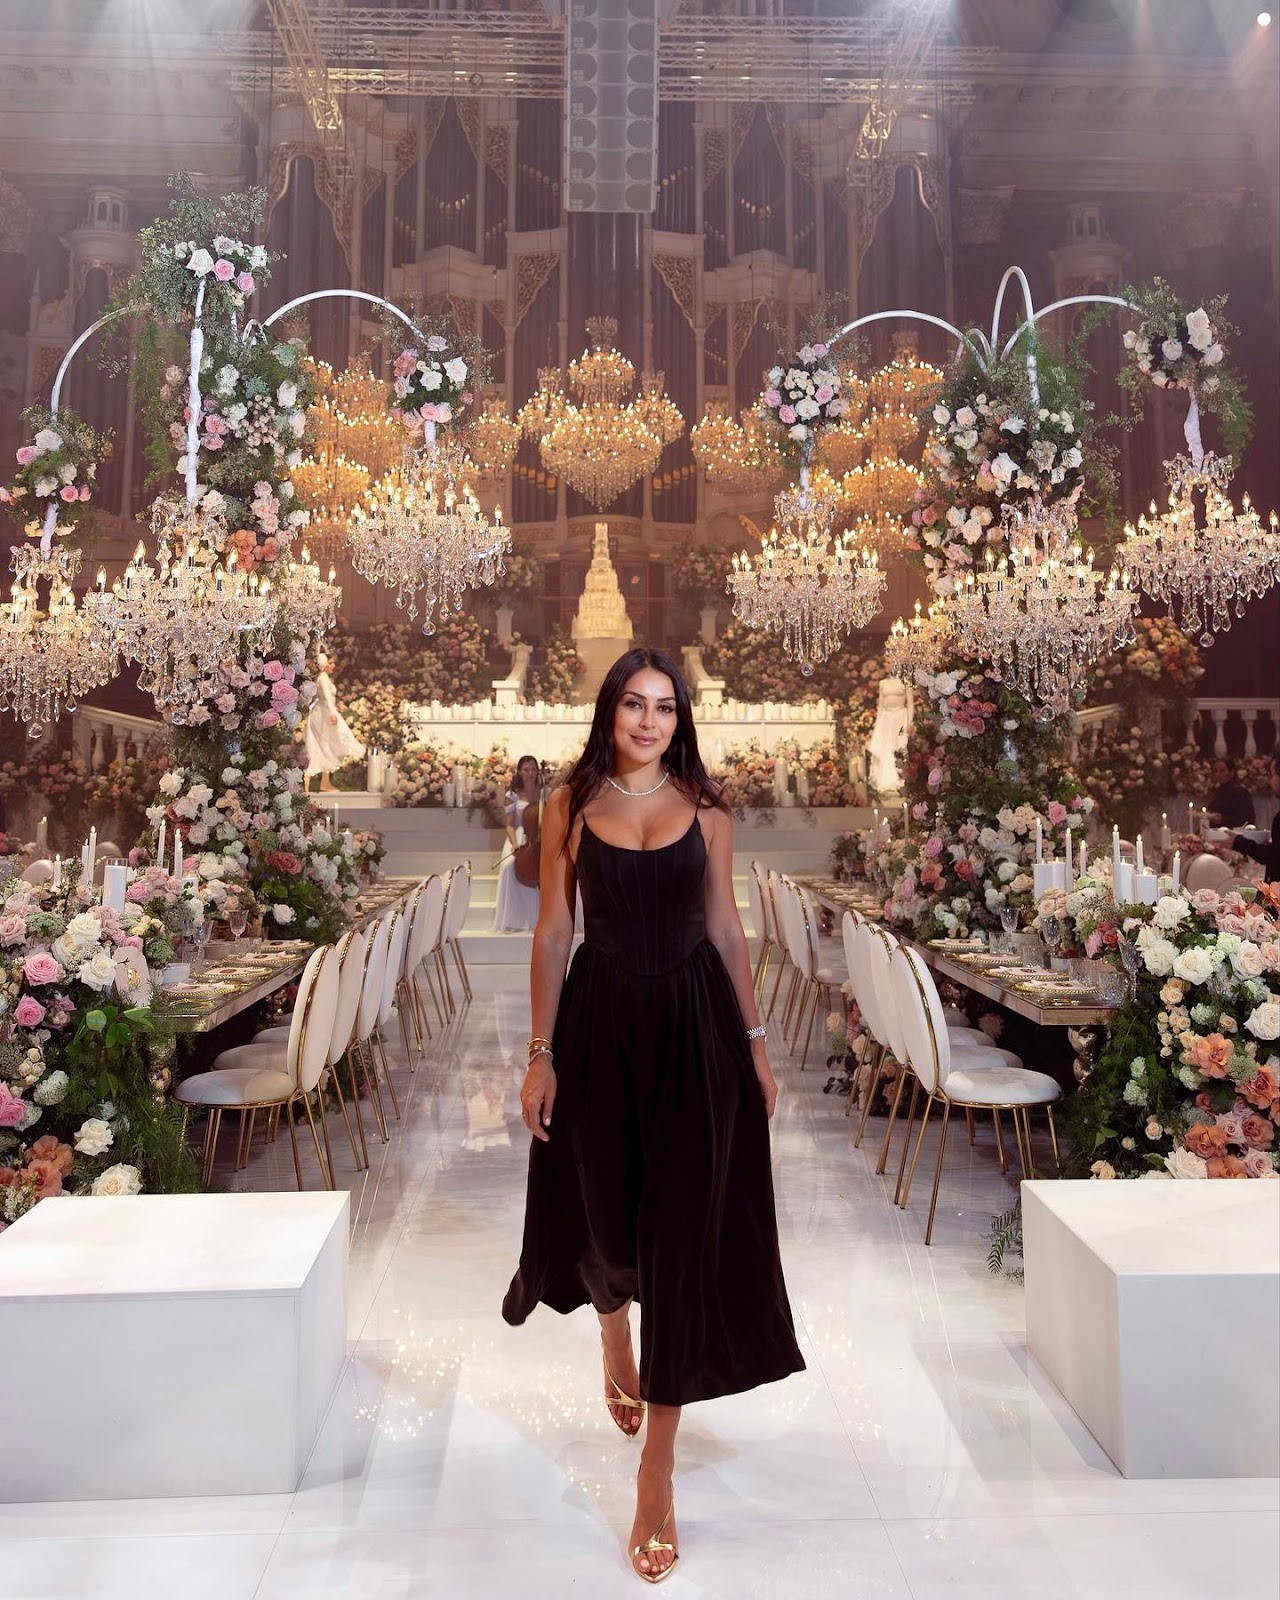 Behind the Scenes: Crafting a Luxury Wedding Experience with Diane Khoury